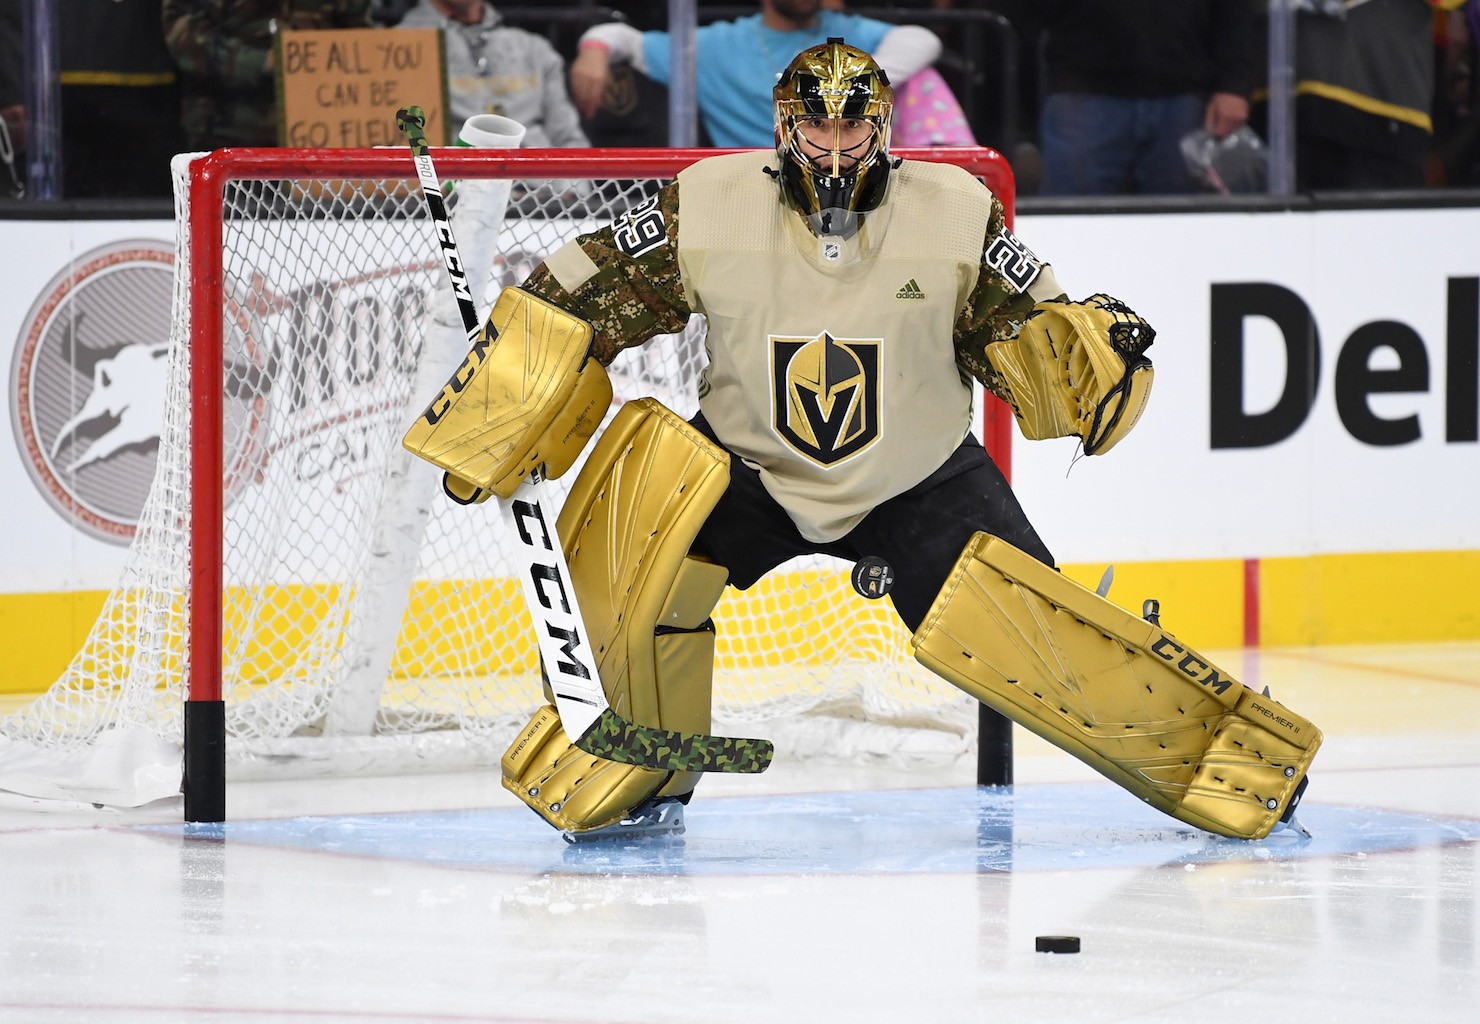 Why doesn't Fleury wear his awesome gold pads? : r/goldenknights